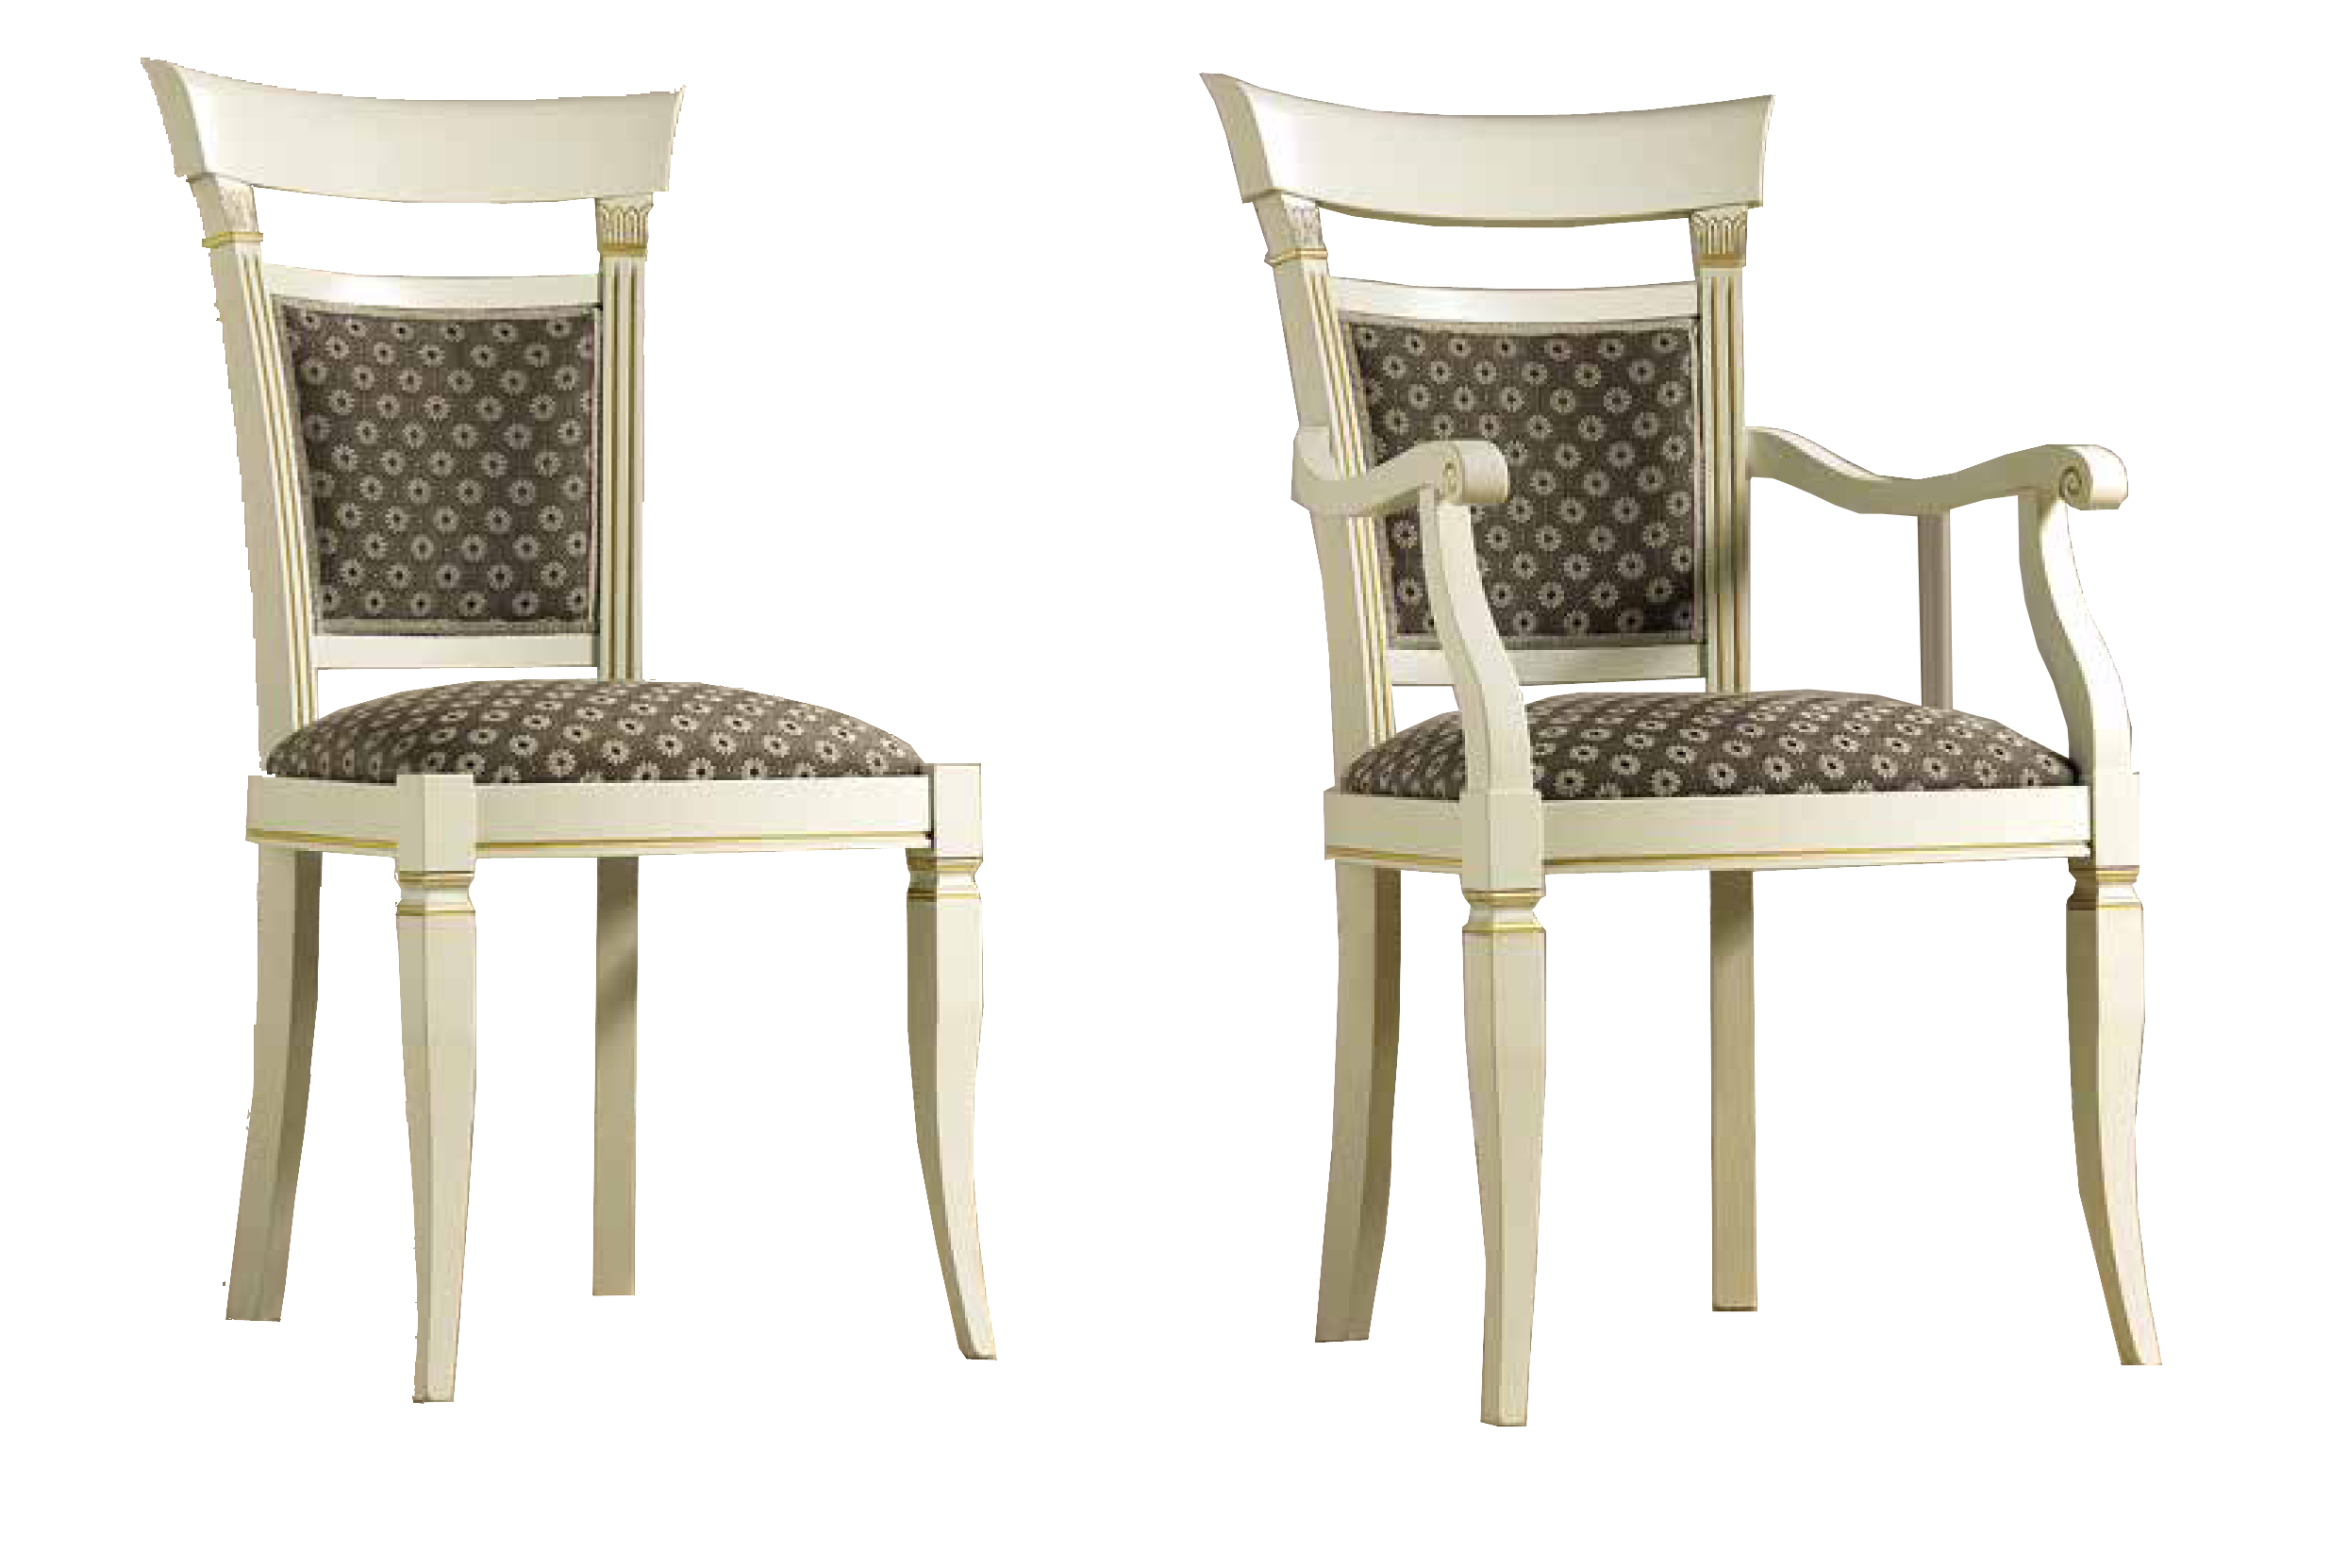 Dining Room Furniture Classic Dining Room Sets Treviso Chairs White Ash